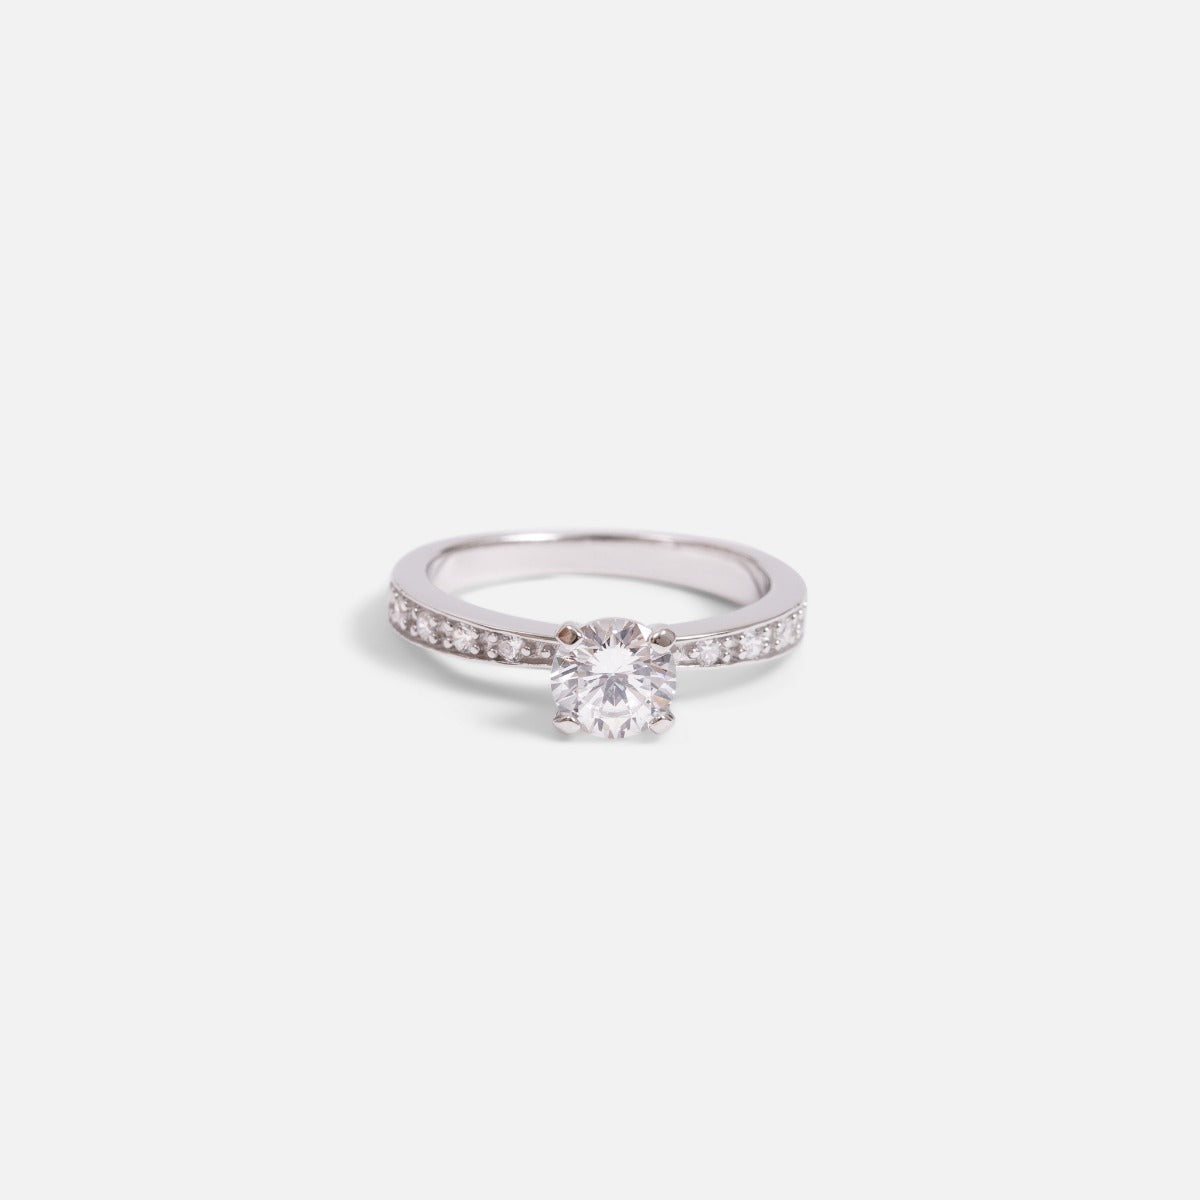 Delicate sterling silver ring with multiple cubic zirconia